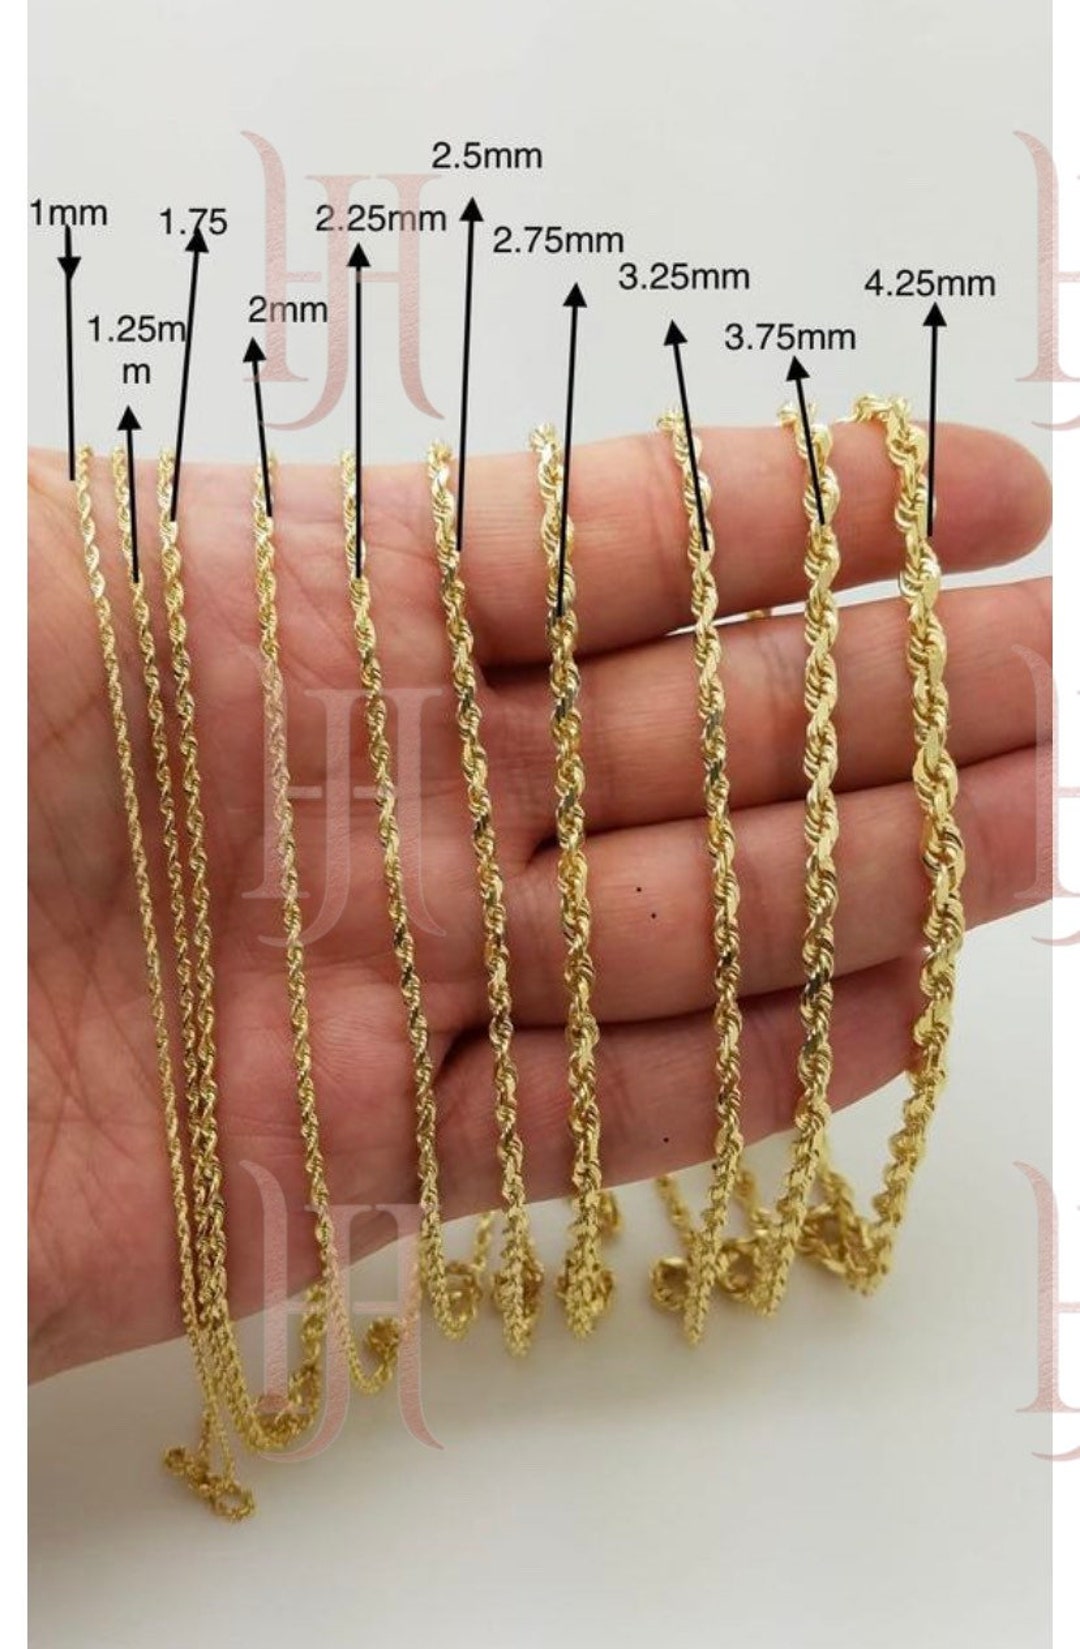  14K Yellow Gold 2 Inch Tiny Necklace Chain Extender, Real Gold  Durable Strong Removable Chain Extender for Gold Necklace Bracelet Jewelry  : Clothing, Shoes & Jewelry